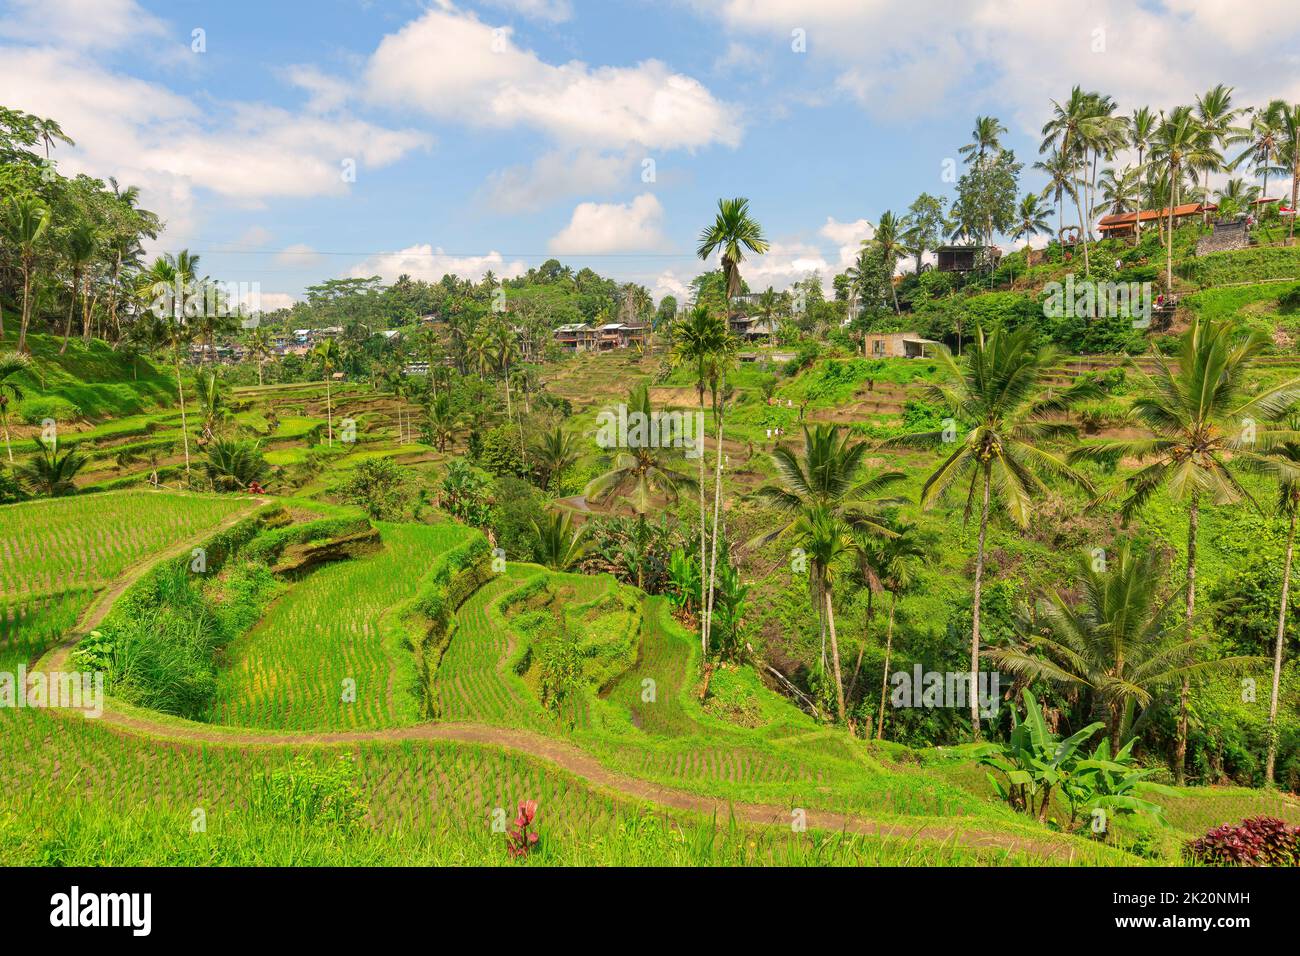 TEGALALANG, UBUD, BALI, INDONESIA: The landscape of the ricefields. Rice terraces famous place Tegallalang near Ubud. The island Bali in indonesia in Stock Photo